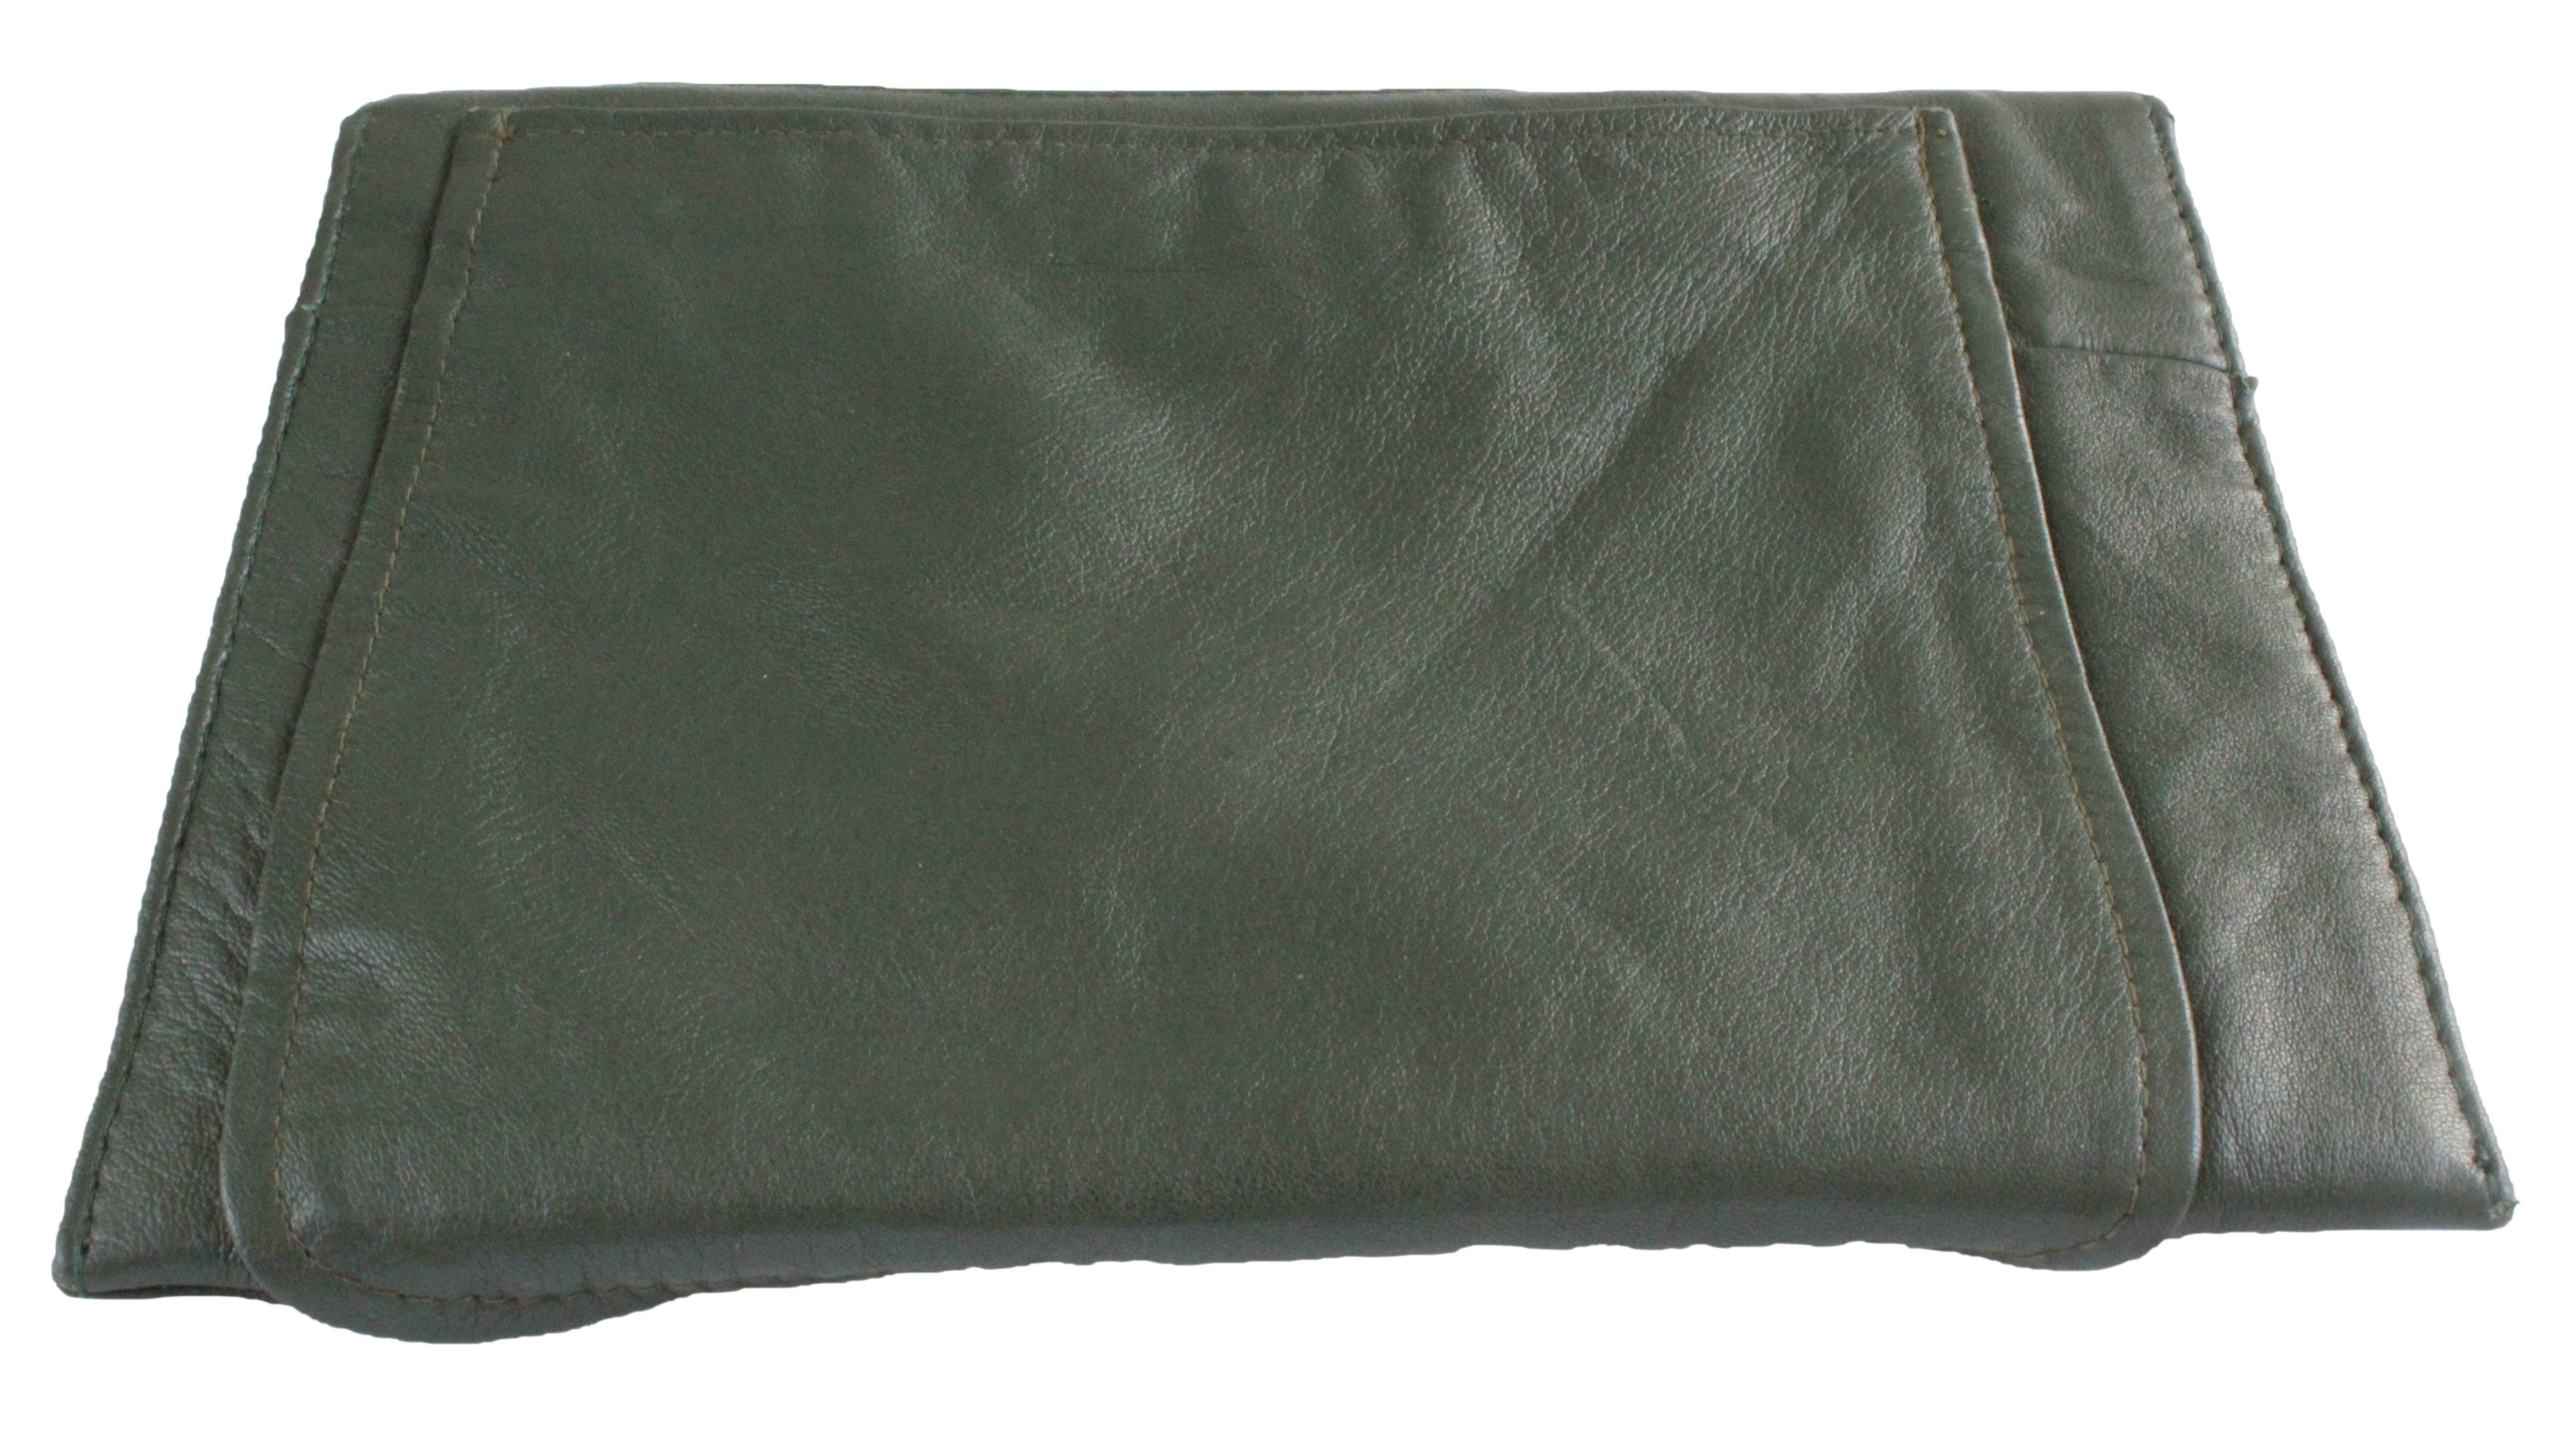 iPad sleeve, cover, back pocket, green, leather, upcycled, tablet sleeve